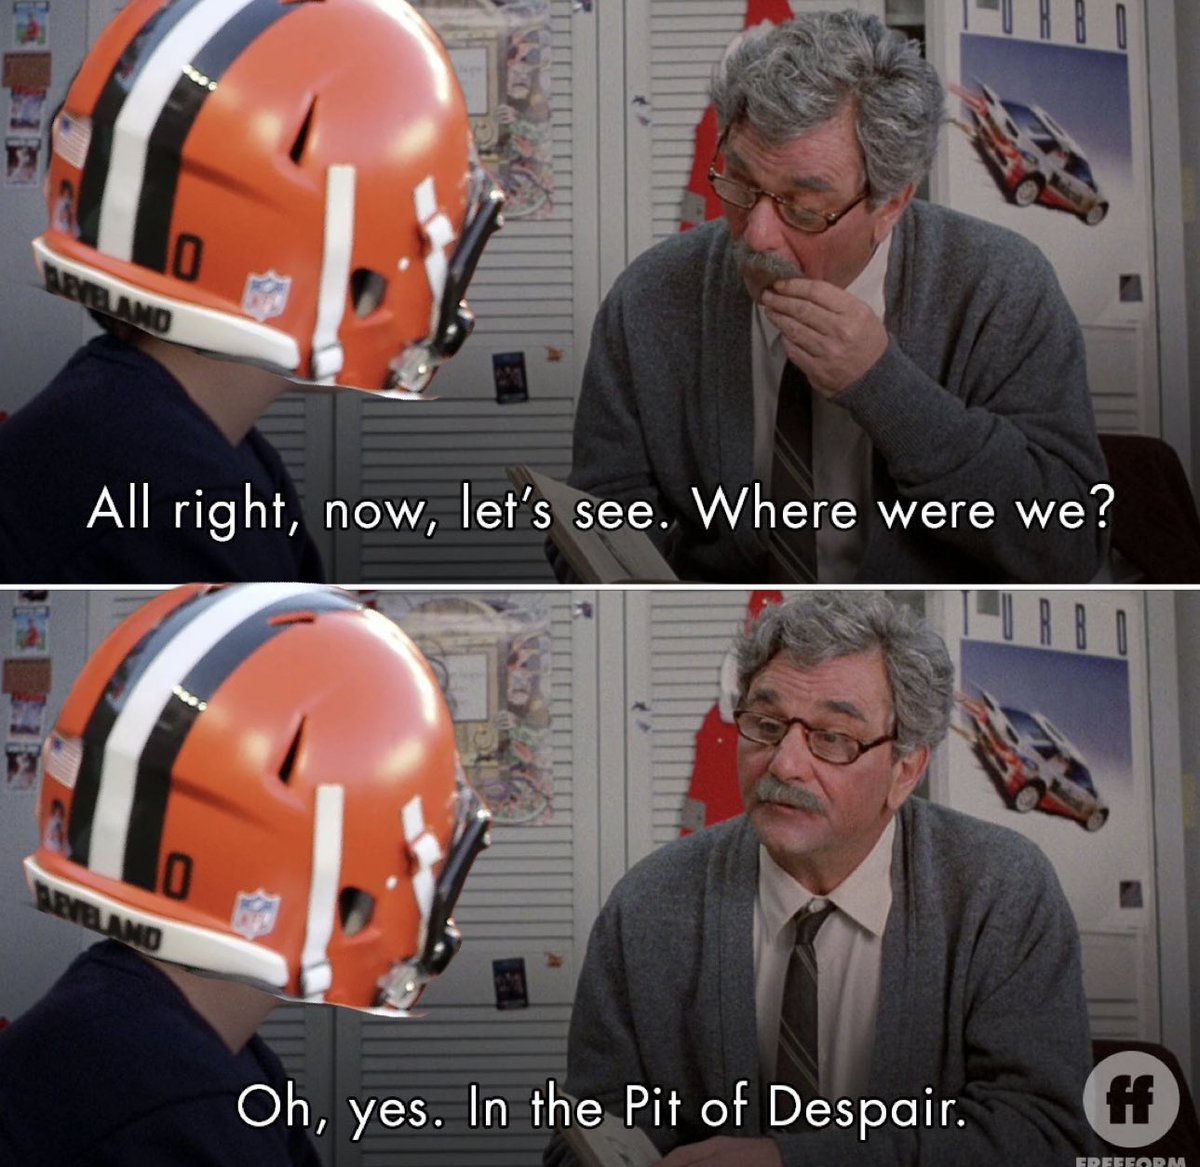 “The Browns take over on offense”